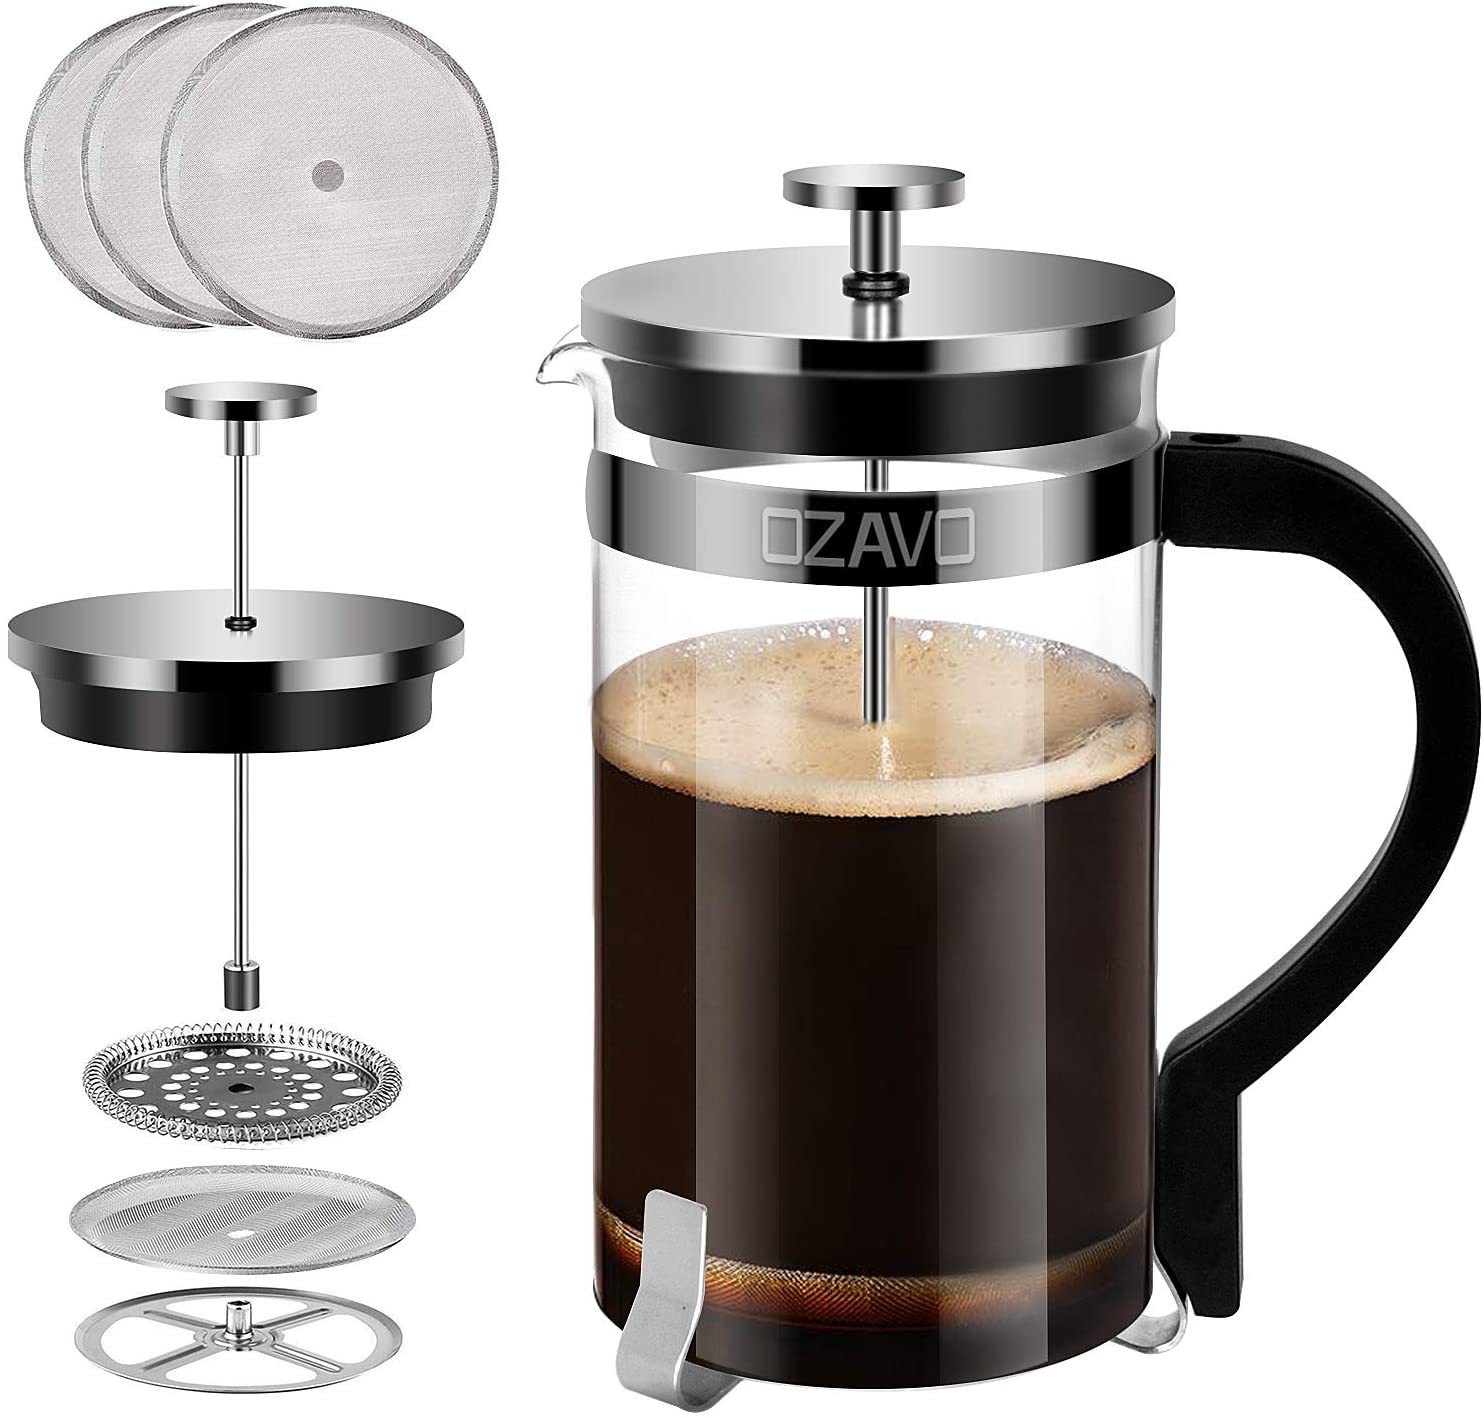 OZAVO French Press 1 Litre Glass Coffee Maker, Coffee Press with Stainless Steel Filter, Glass Coffee Jug, Tea Maker with Stainless Steel Frame, 8 Cups